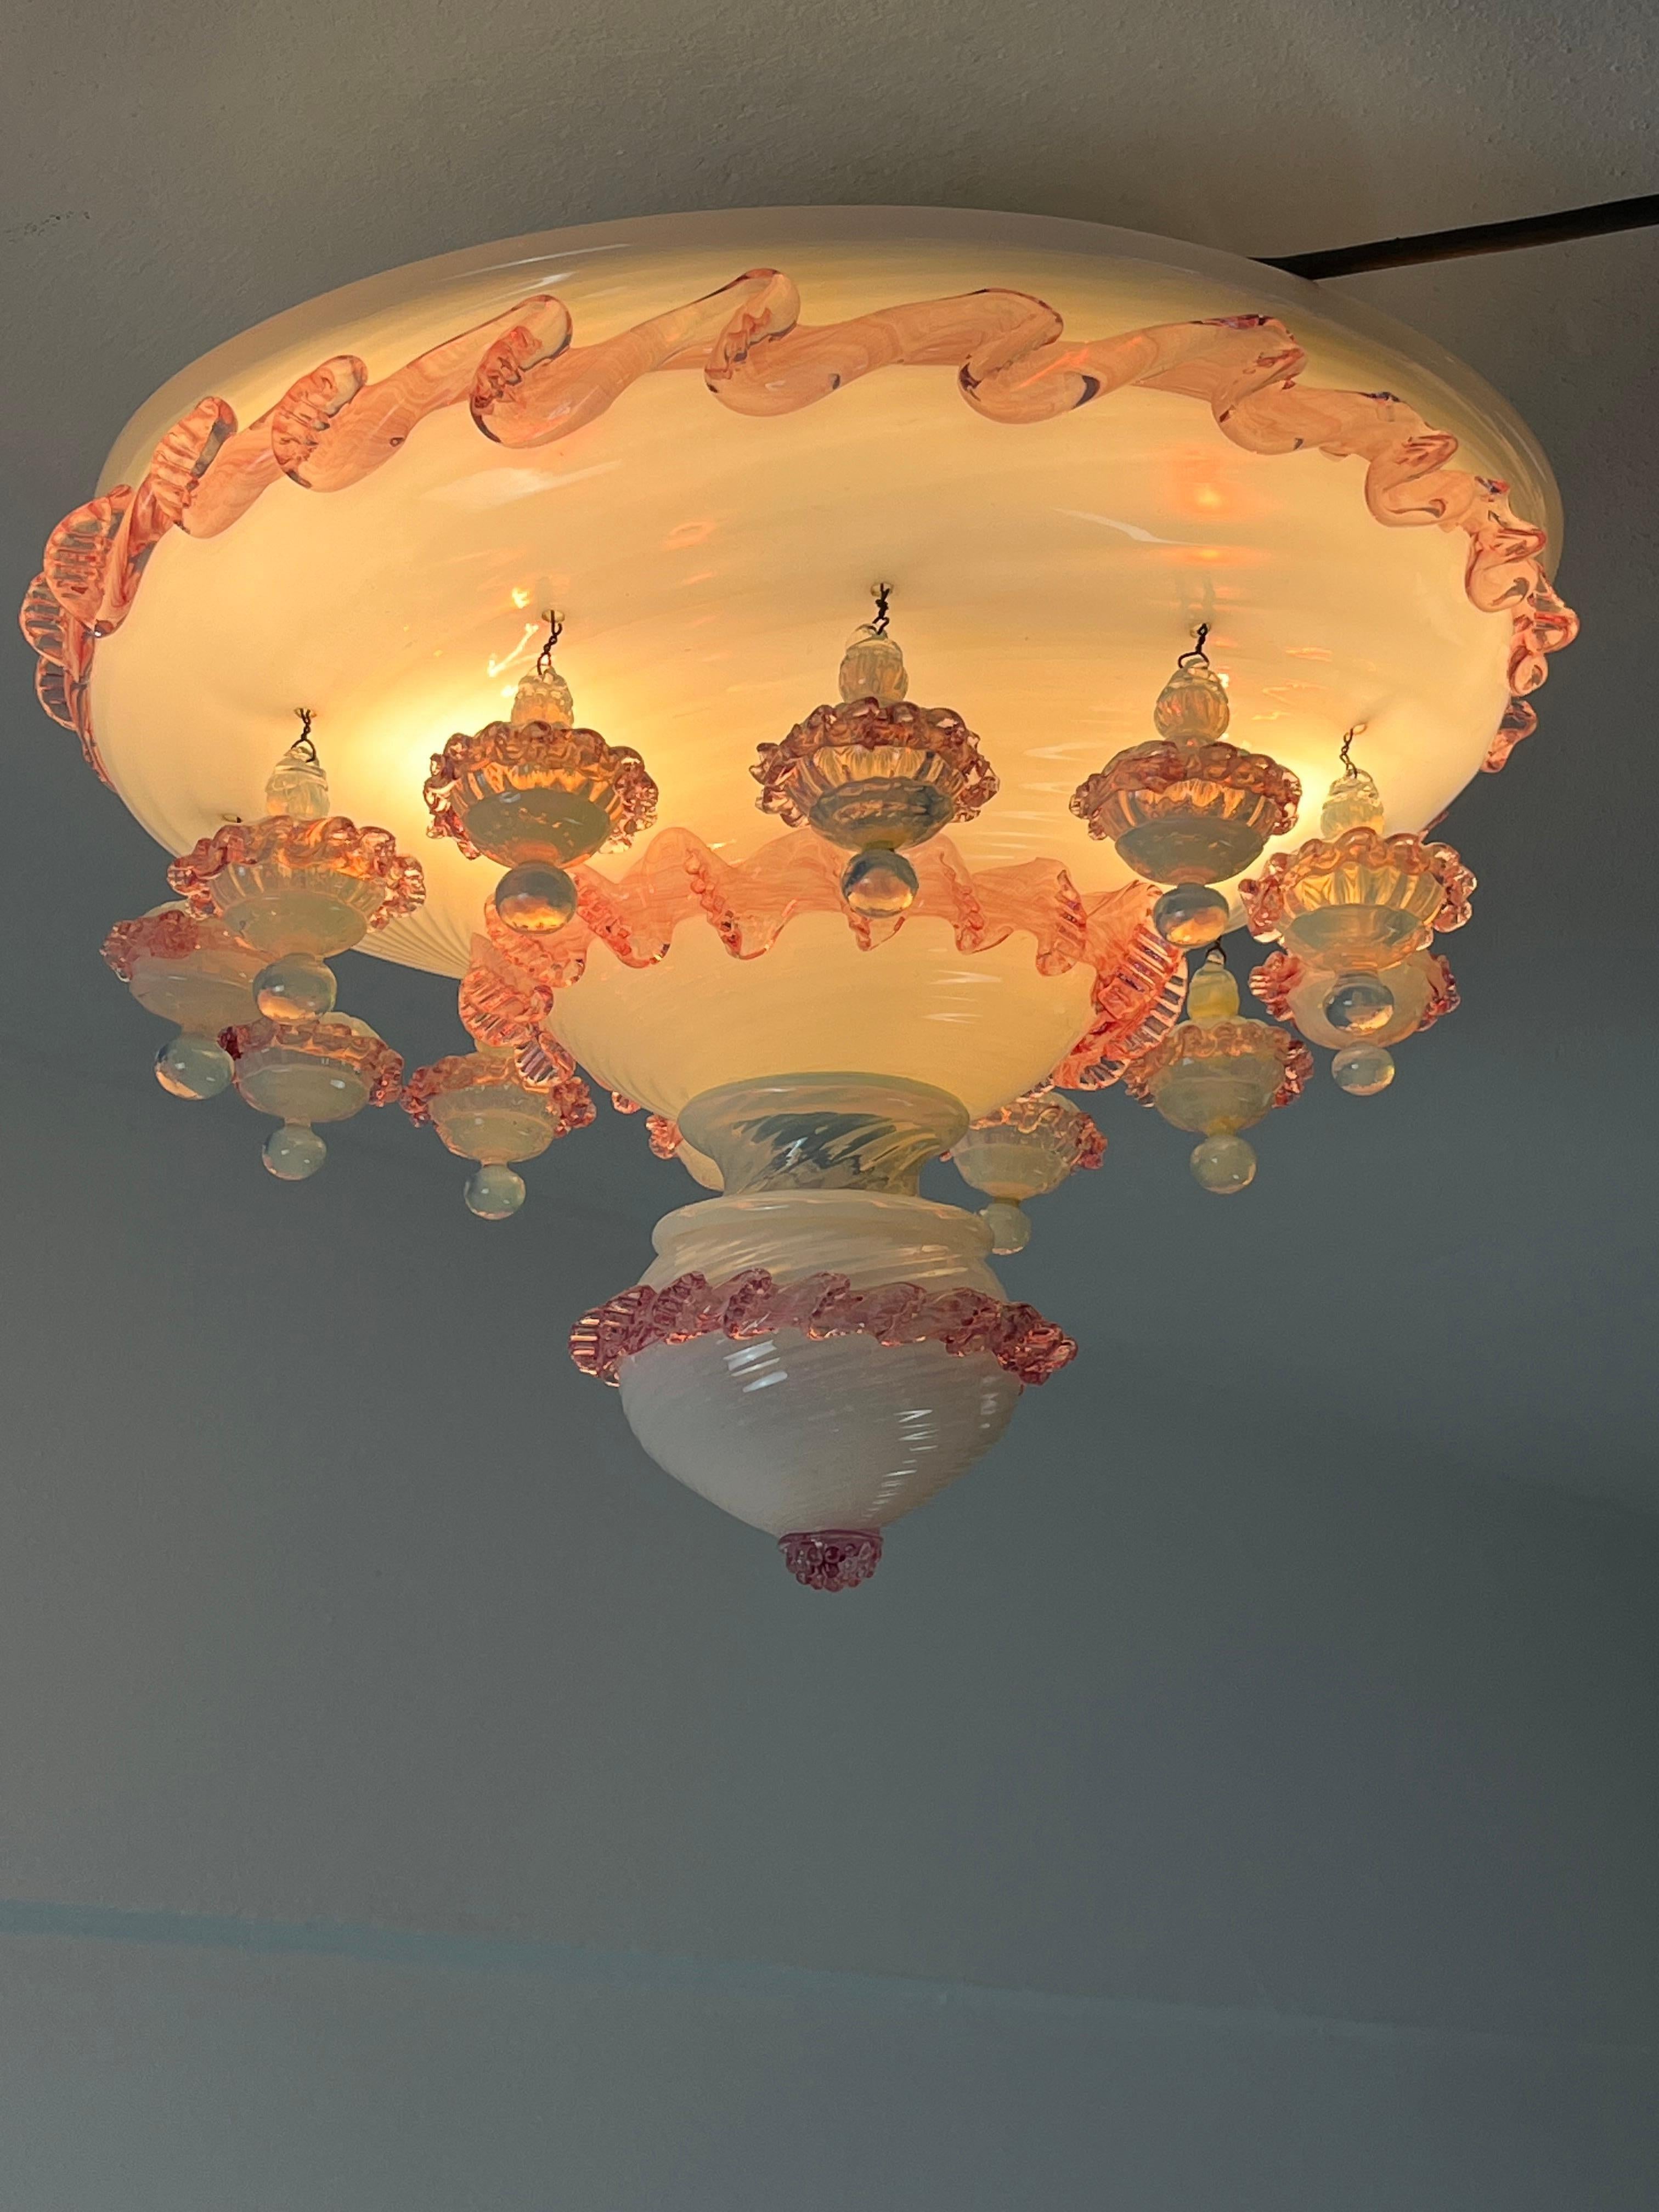 3-light ceiling light in Murano glass, Italy, 1970s
Purchased by my grandparents in Venice during their honeymoon.
Good condition.
E14 lamps.